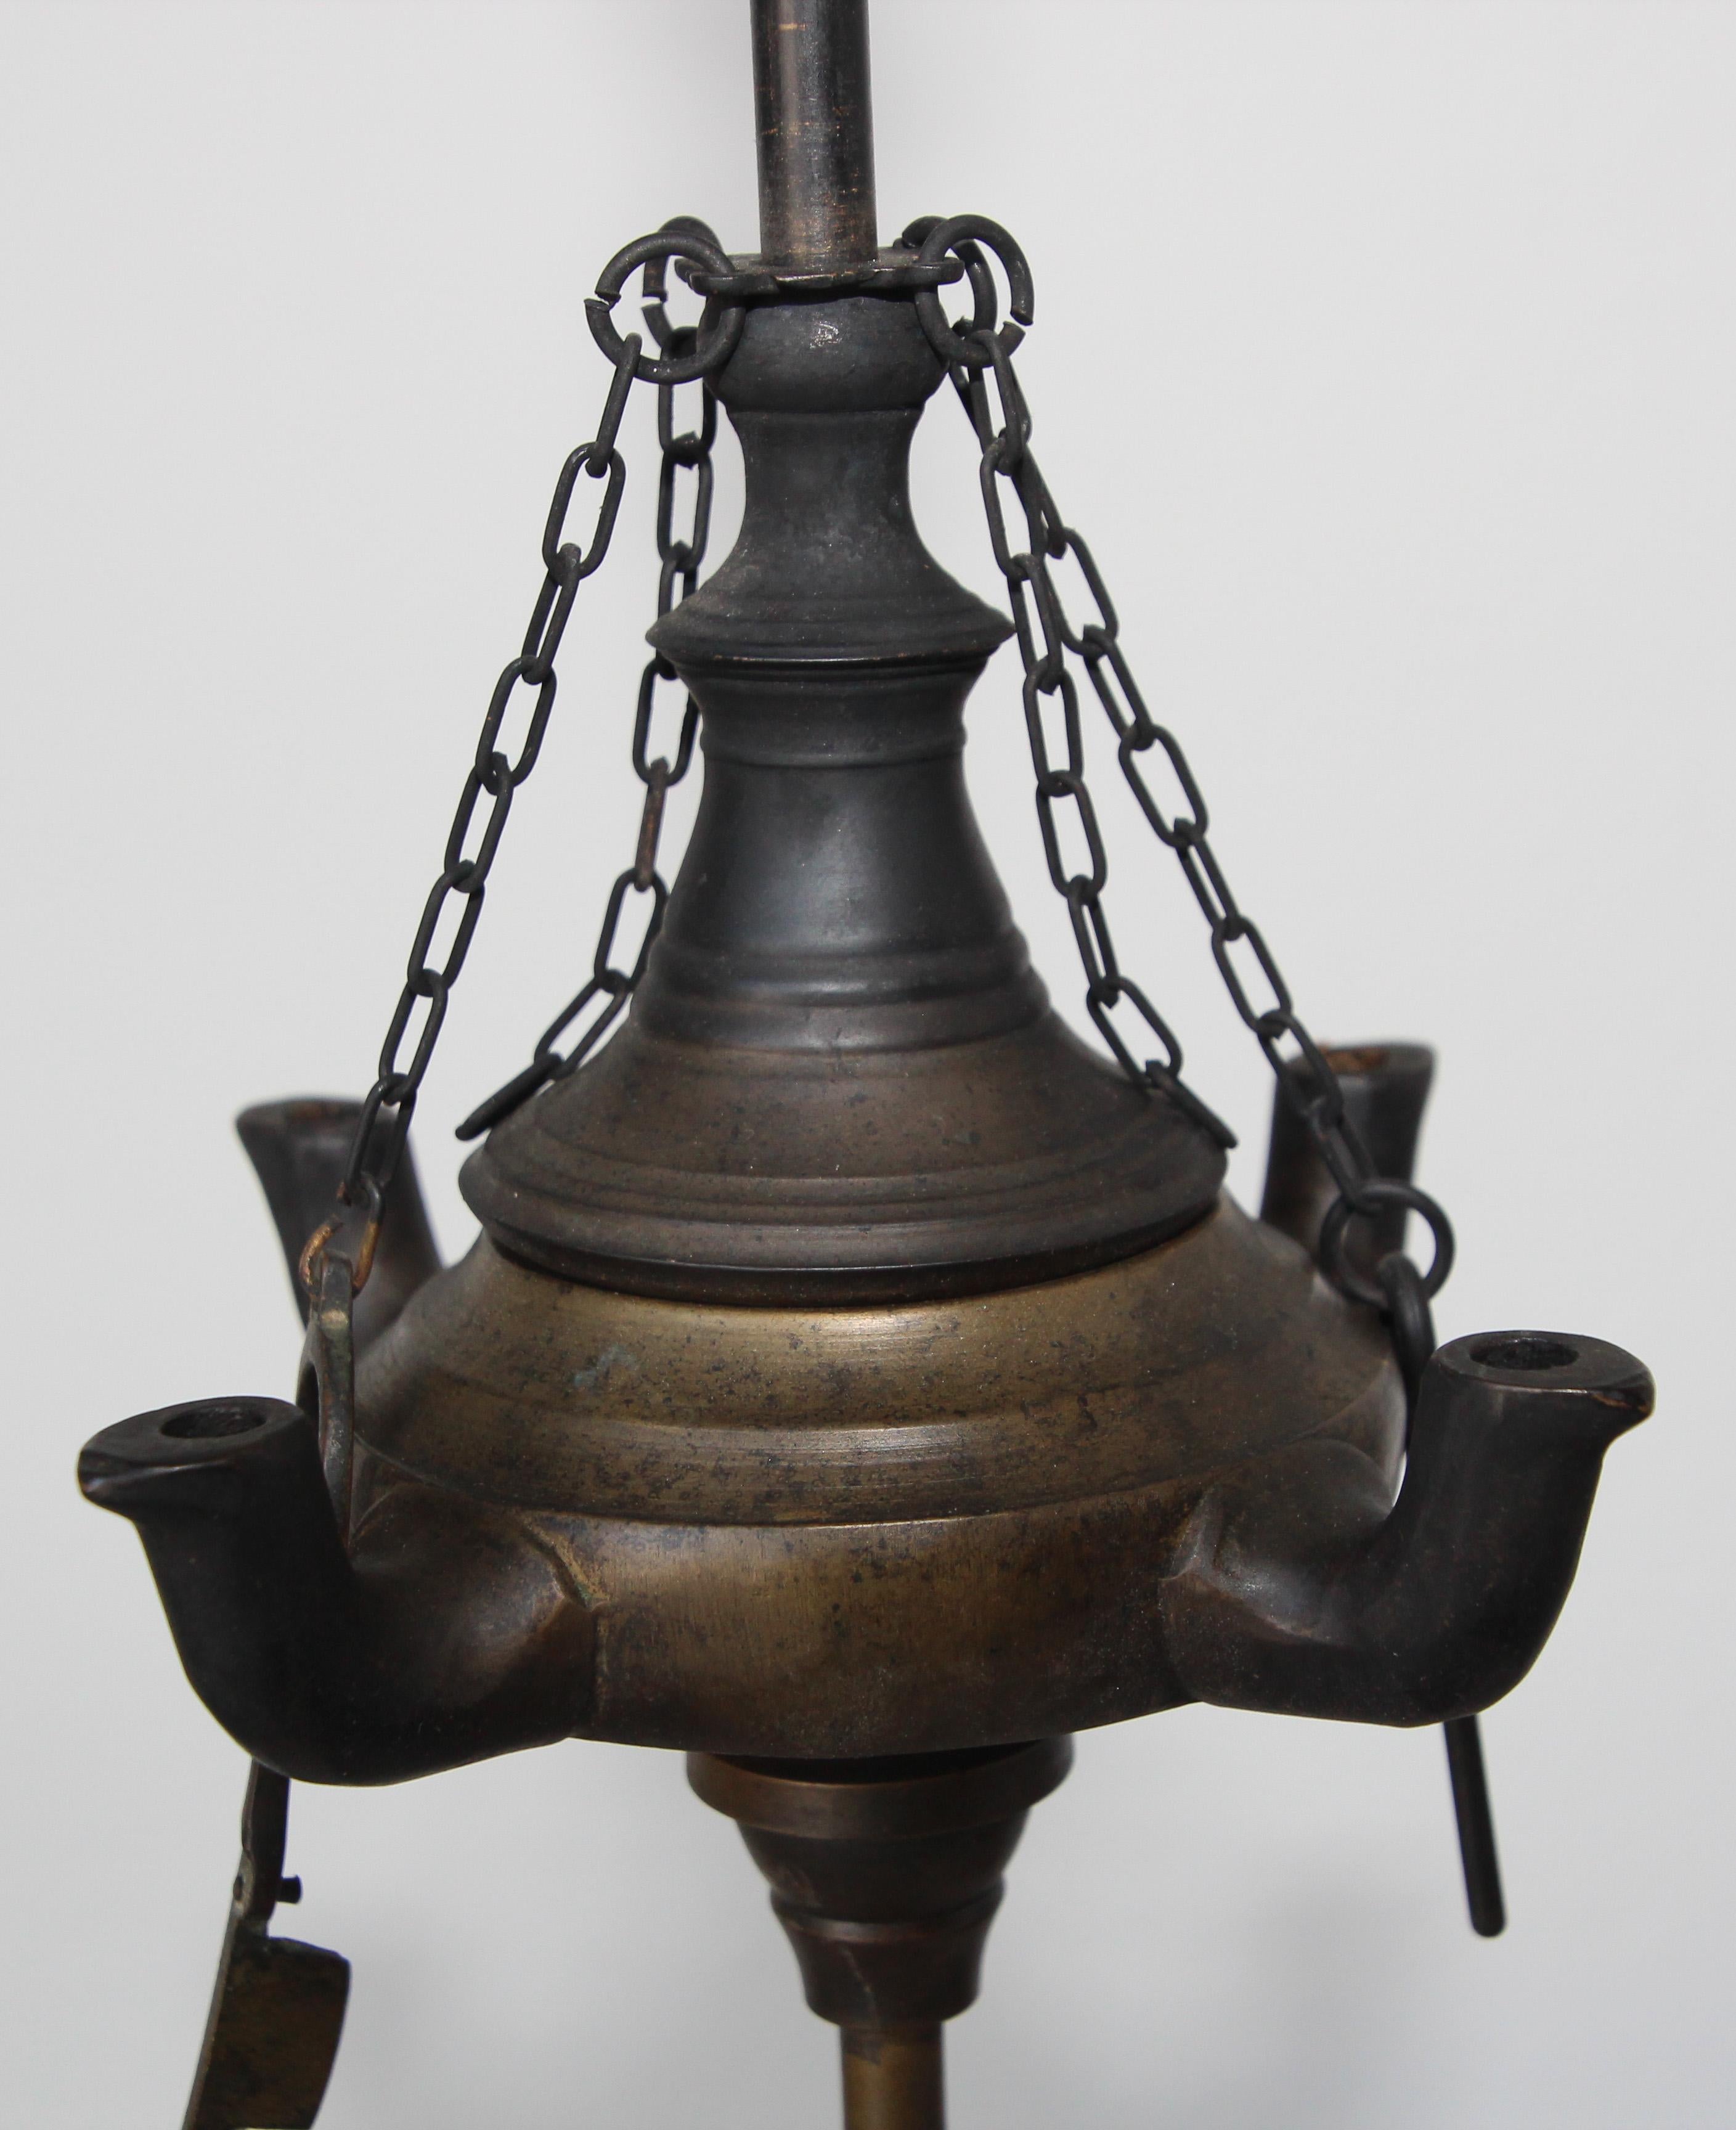 Hand-Crafted Antique Mughal Rajasthani India Bronze Oil Lamp For Sale